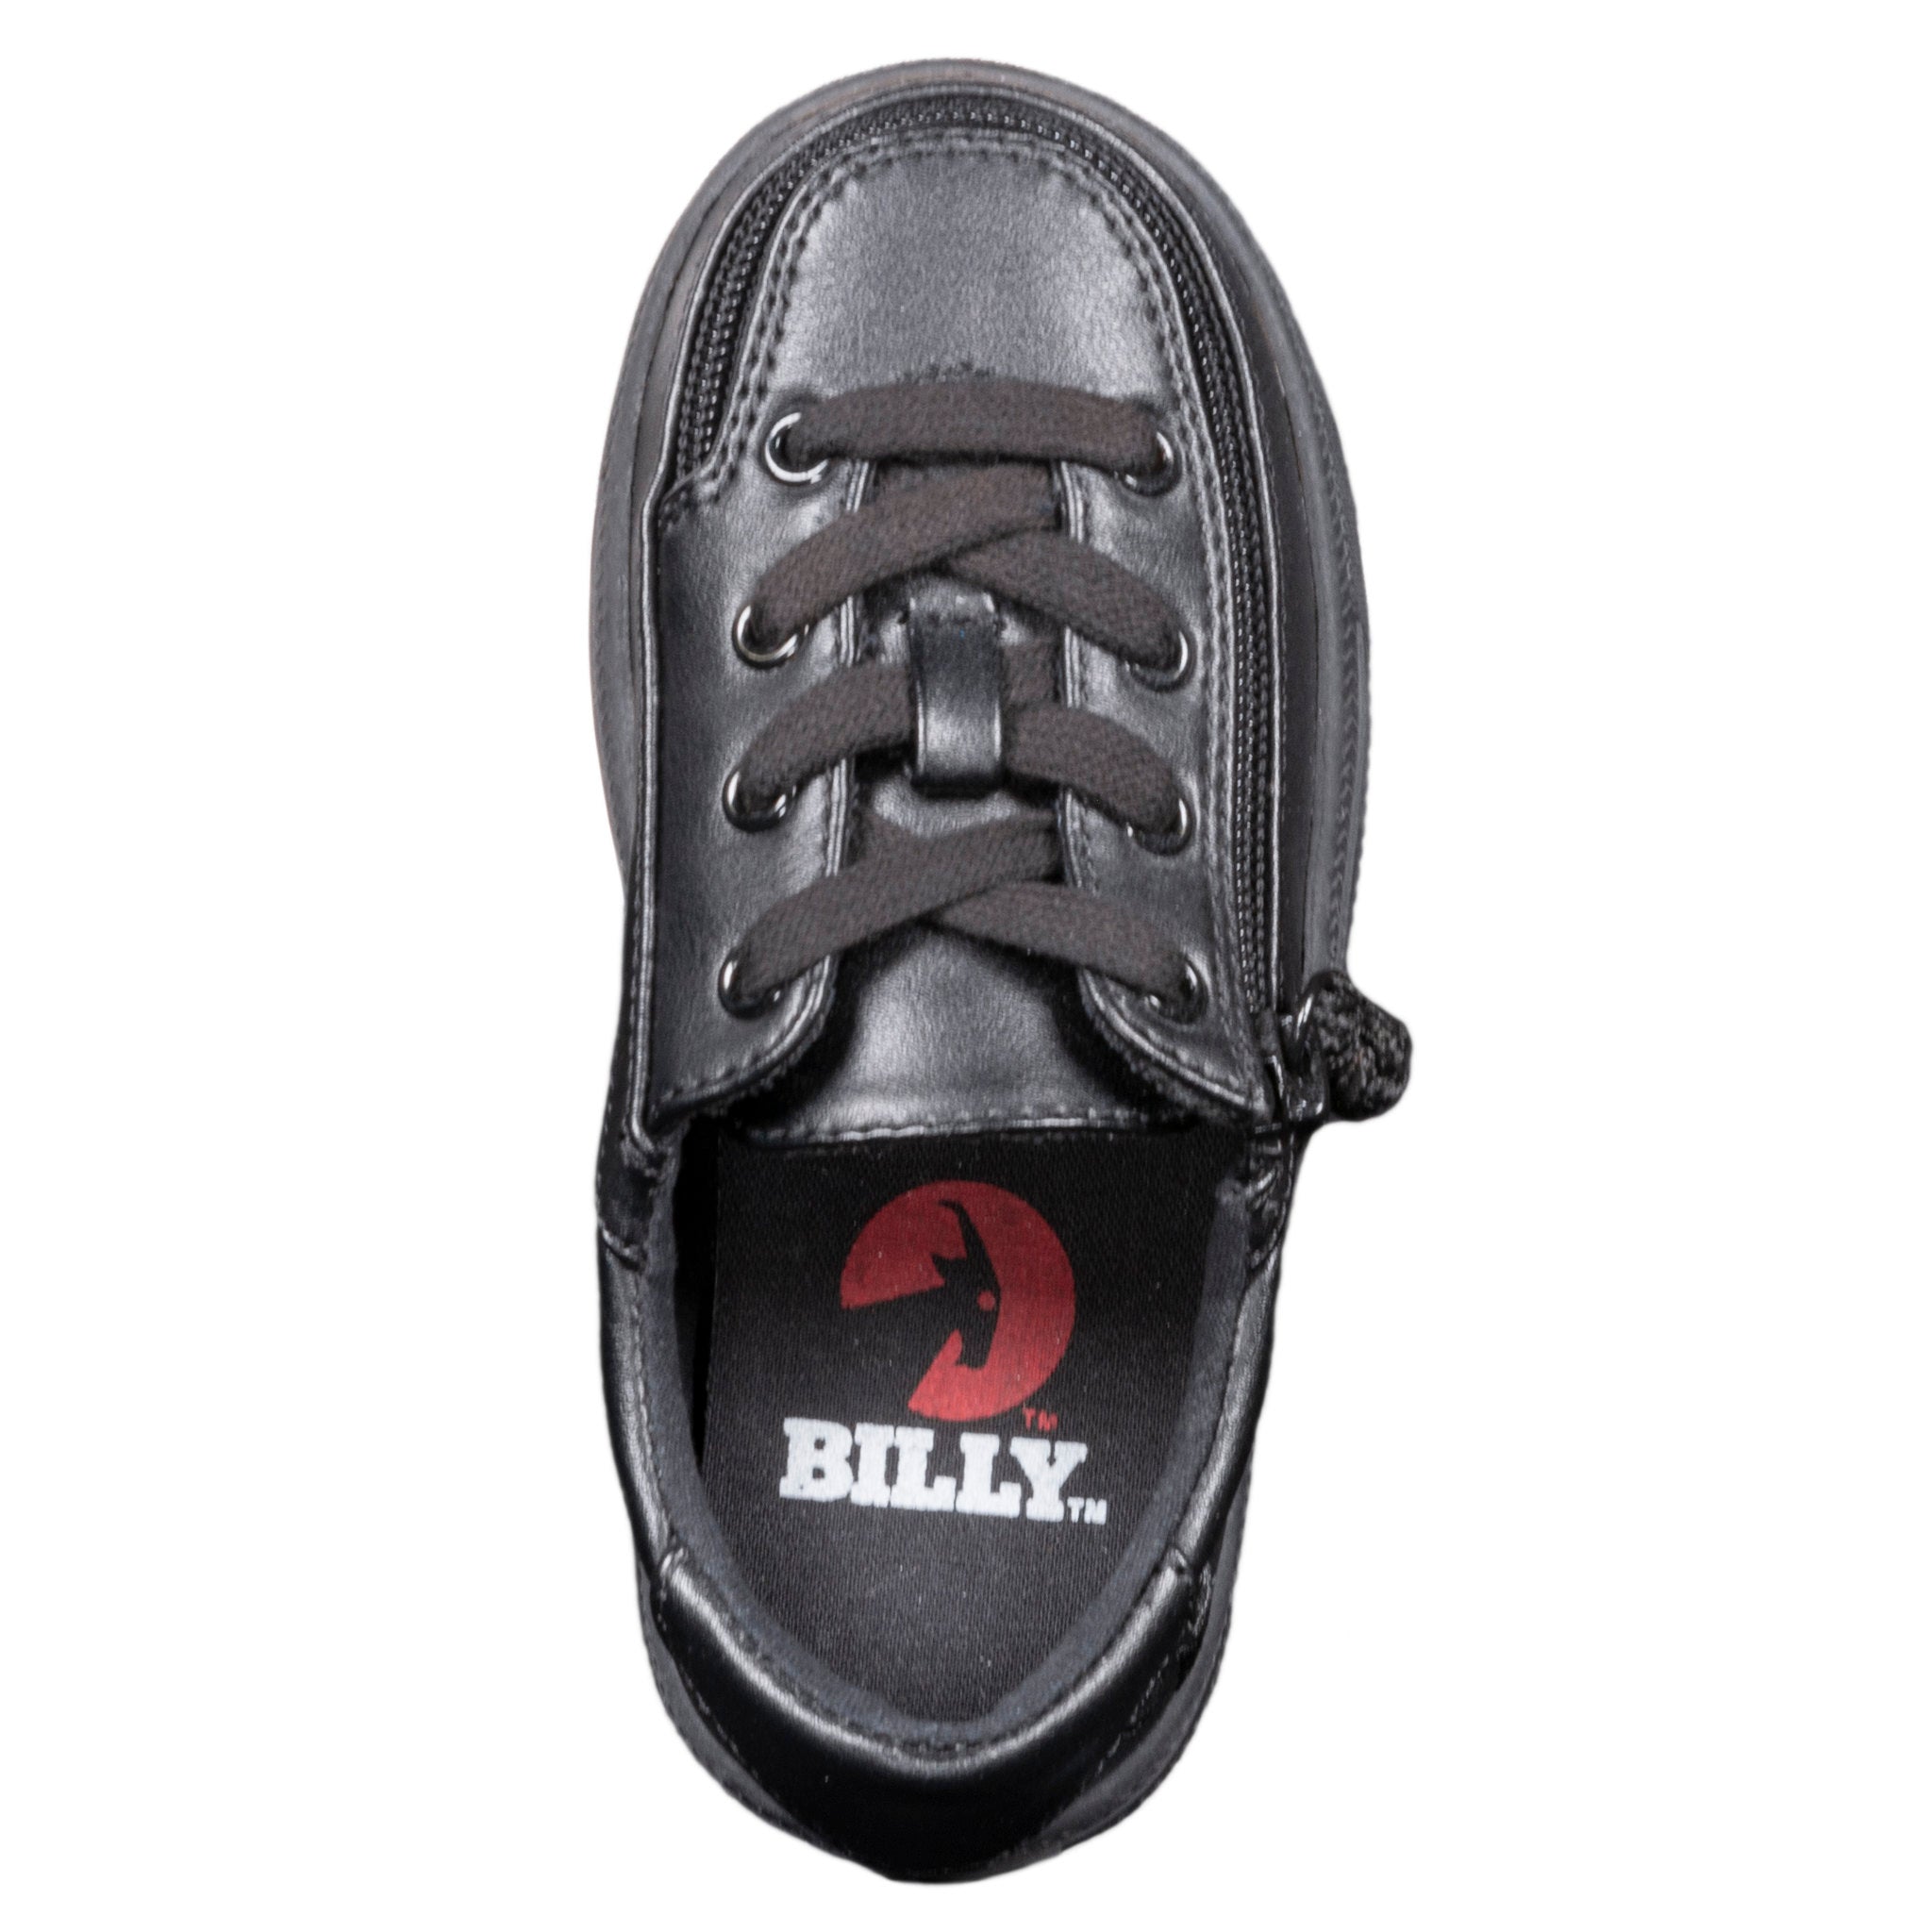 Billy Footwear (Toddlers)- Low Top Black Faux Leather Shoes CLEARANCE